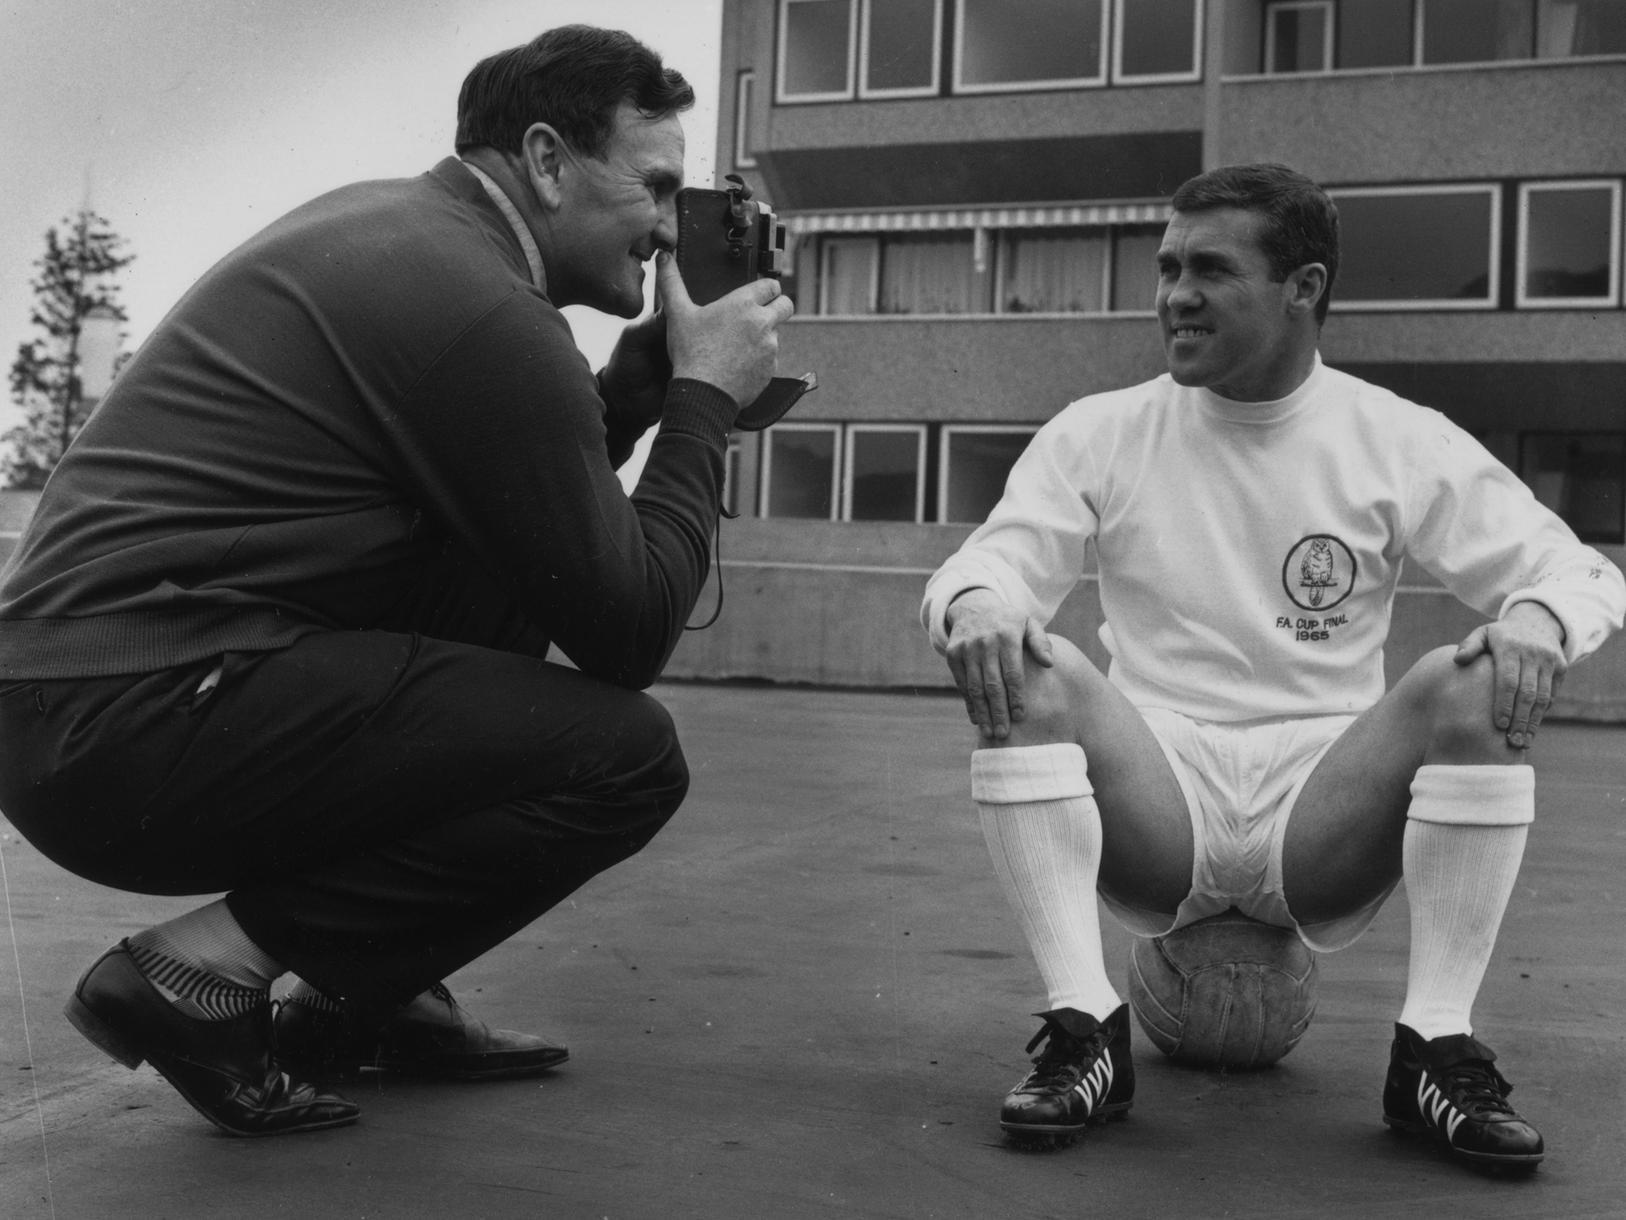 Don Revie, the manager of Leeds United FC, filming Bobby Collins, the team captain.